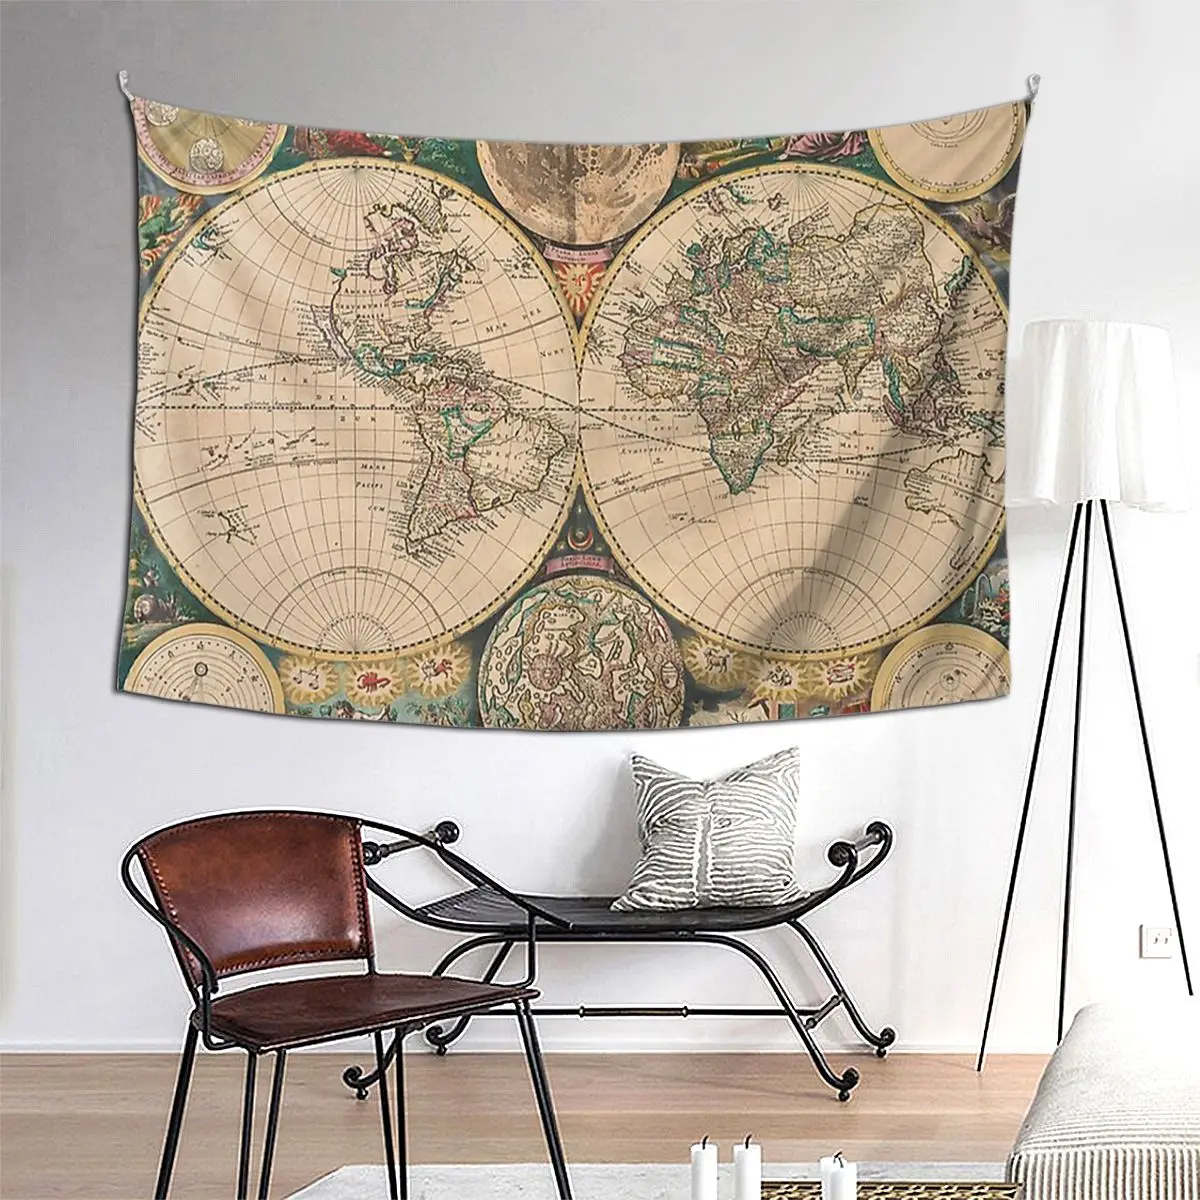 

Vintage Map Of The World (1672) 2 Tapestry Art Wall Hanging Aesthetic Home Decor Tapestries for Living Room Bedroom Dorm Room